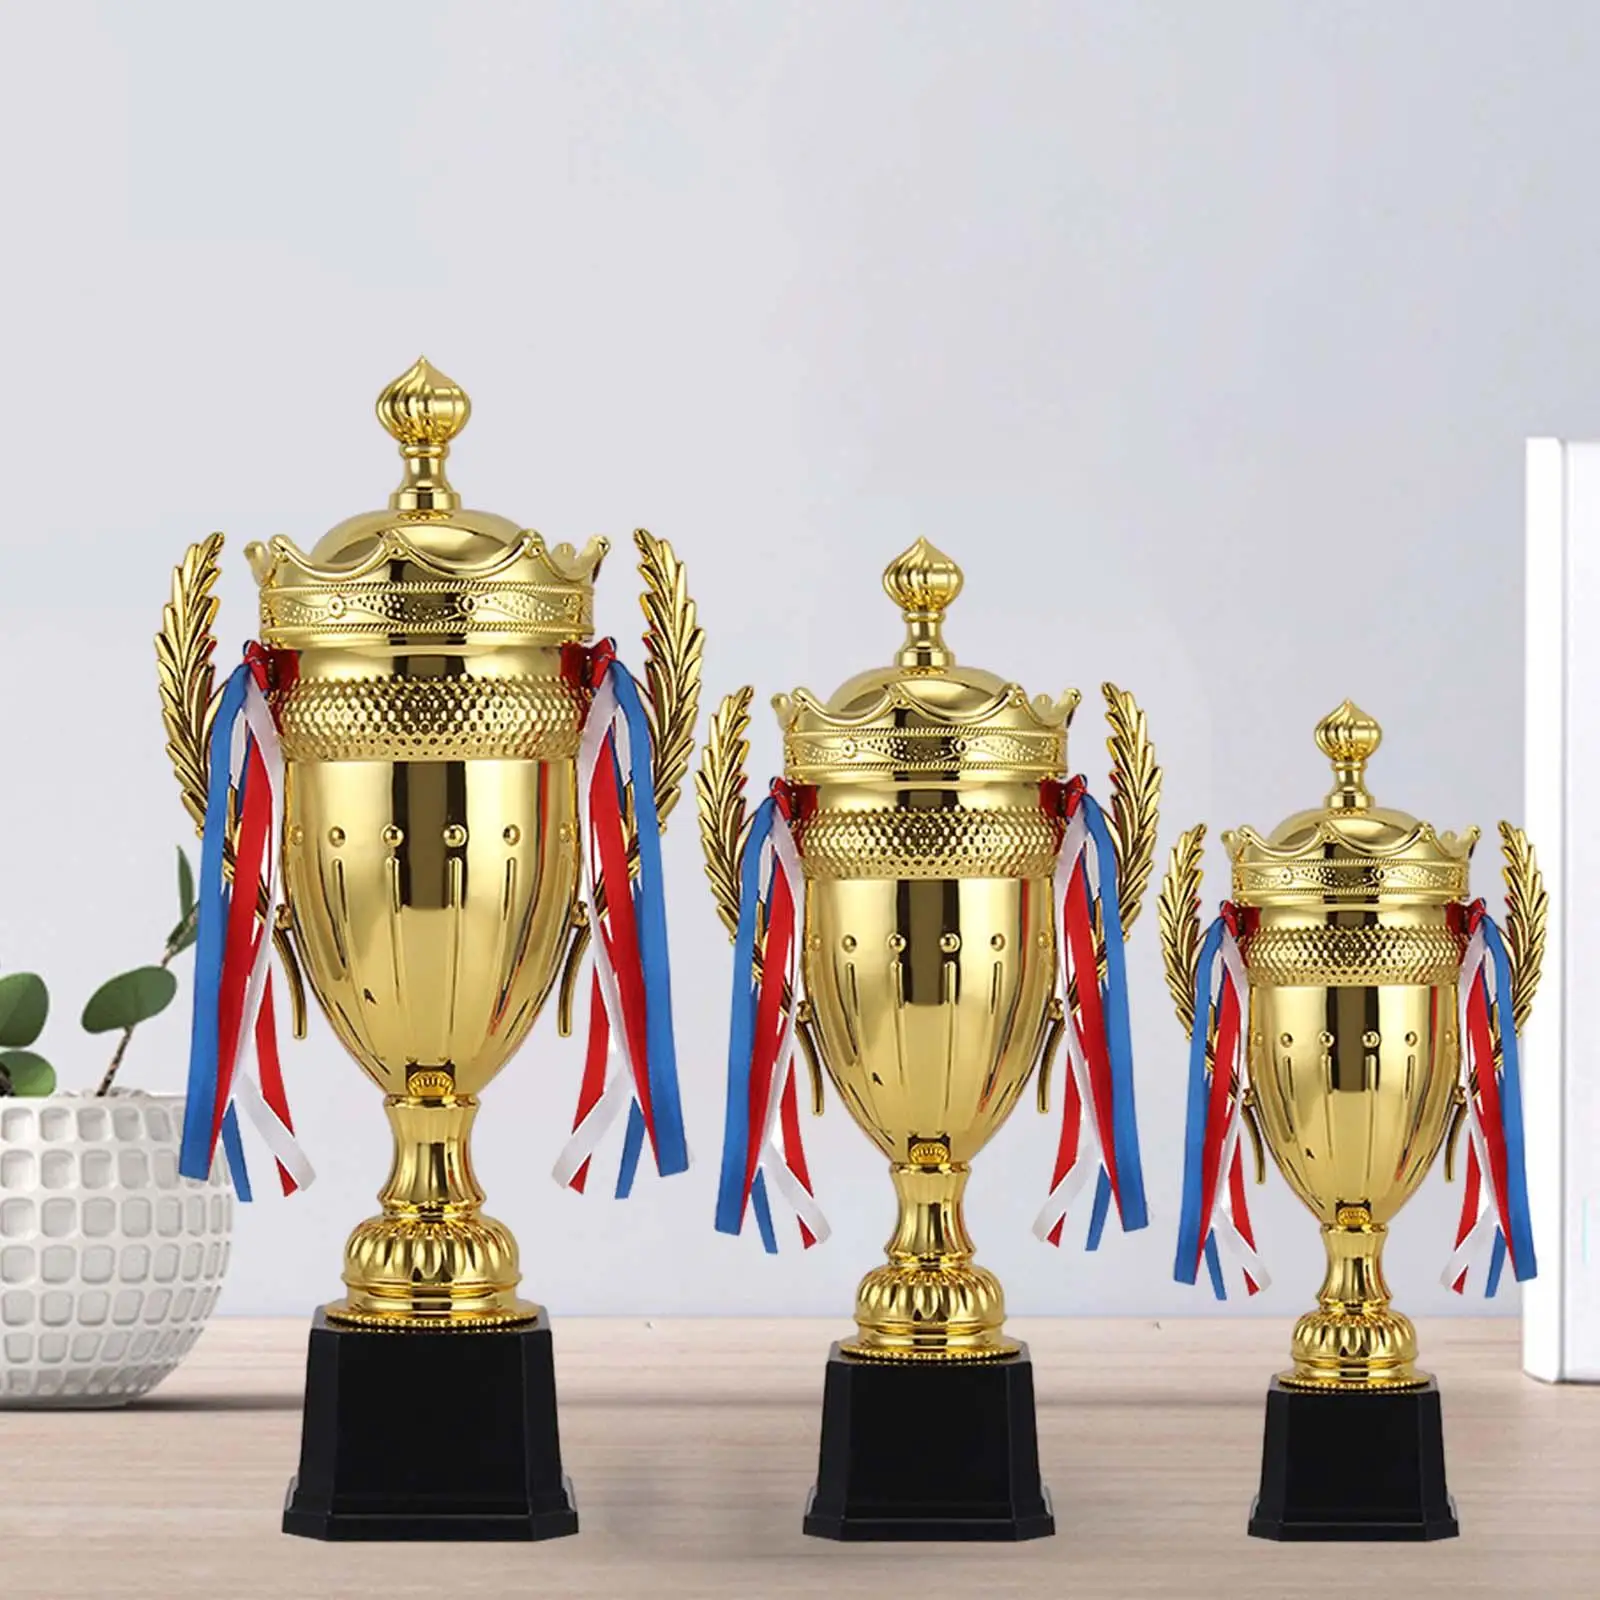 Adults Trophy Party Supplies Decoration Fashion Trophy for Kids for Rewards Basketball Appreciation Gifts Award Ceremonies Party